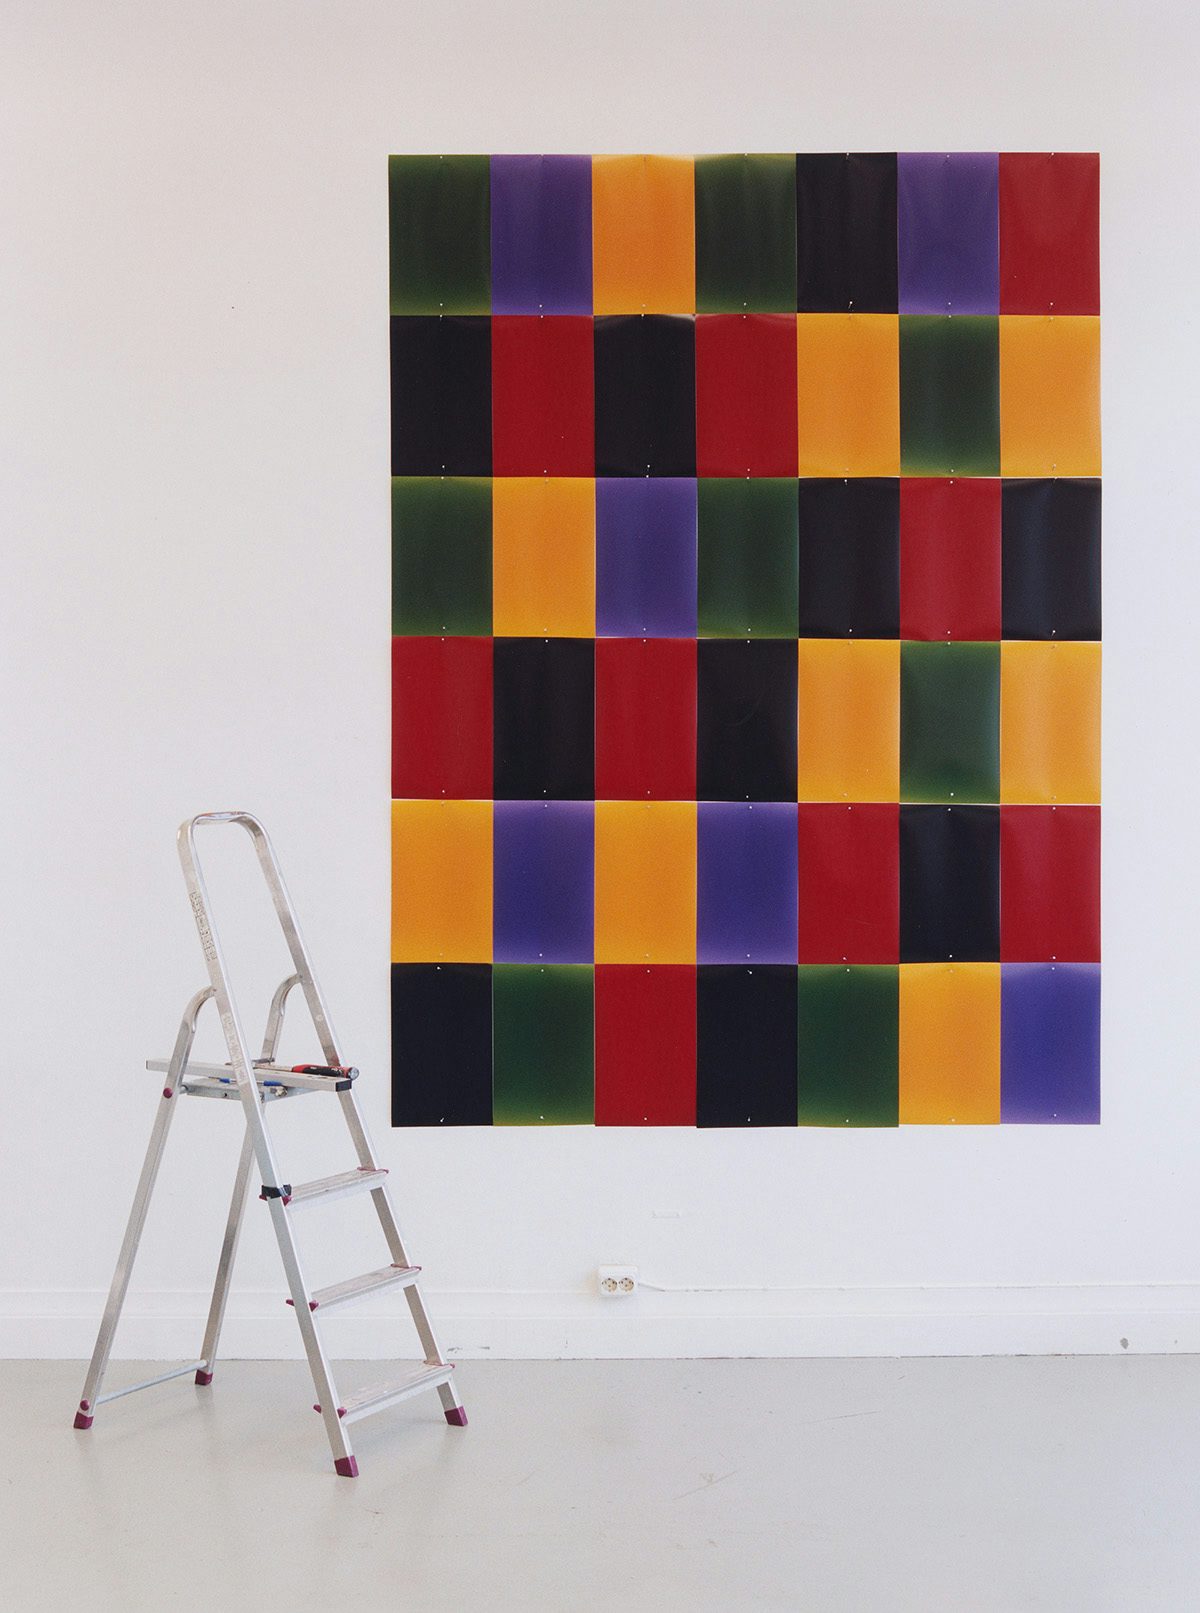 Image of a step ladder next to a tiled wall hanging by Erik Gustafsson